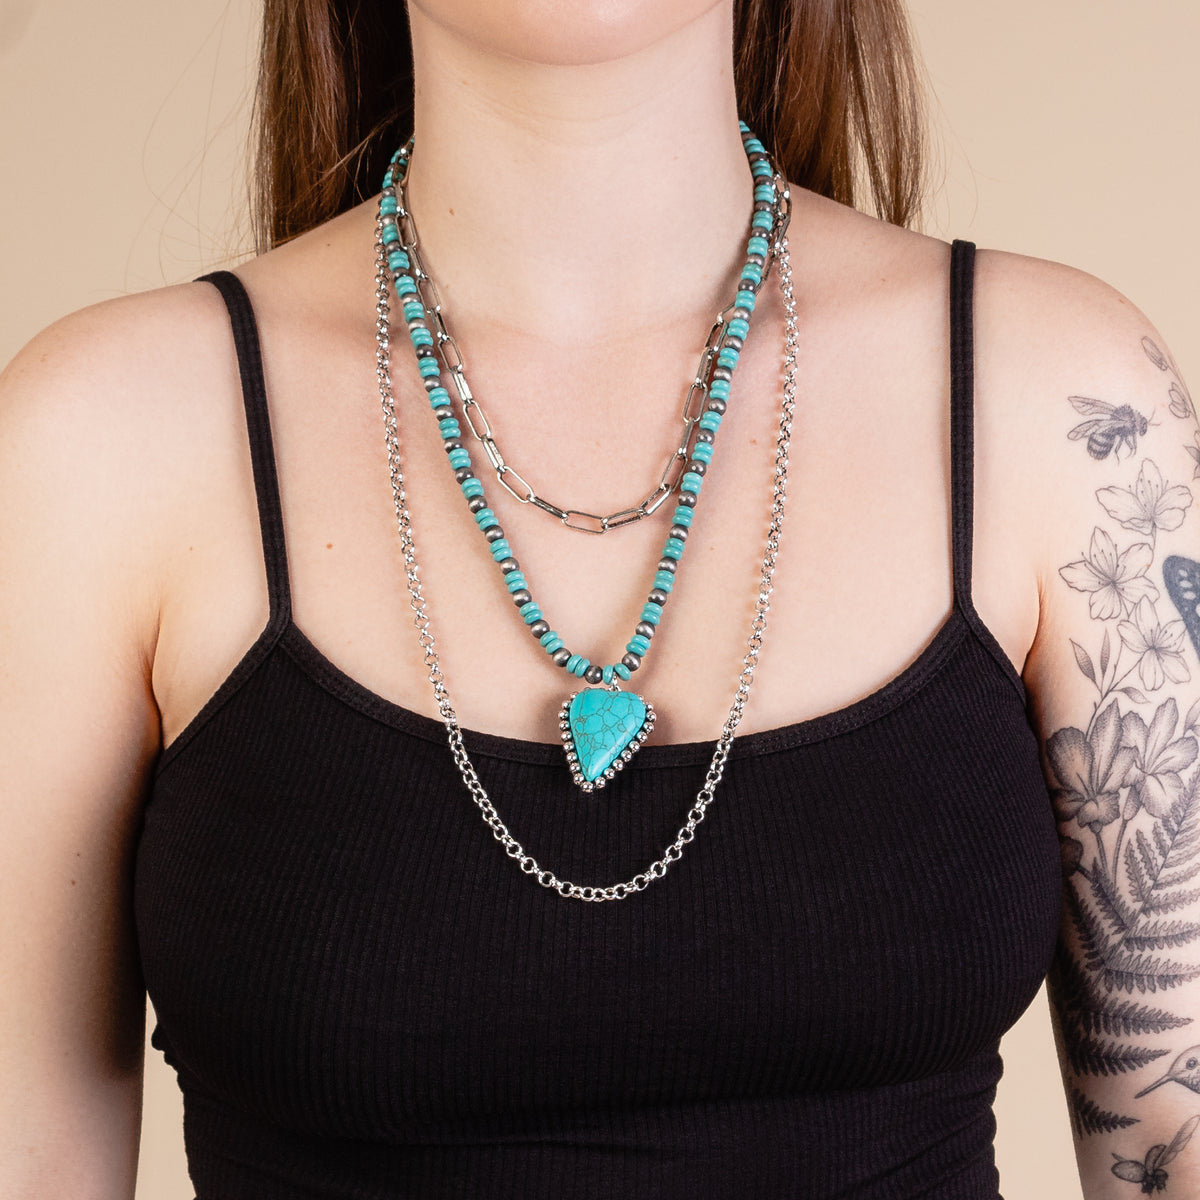 72923 - Layered Heart Necklace - Turquoise & Silver